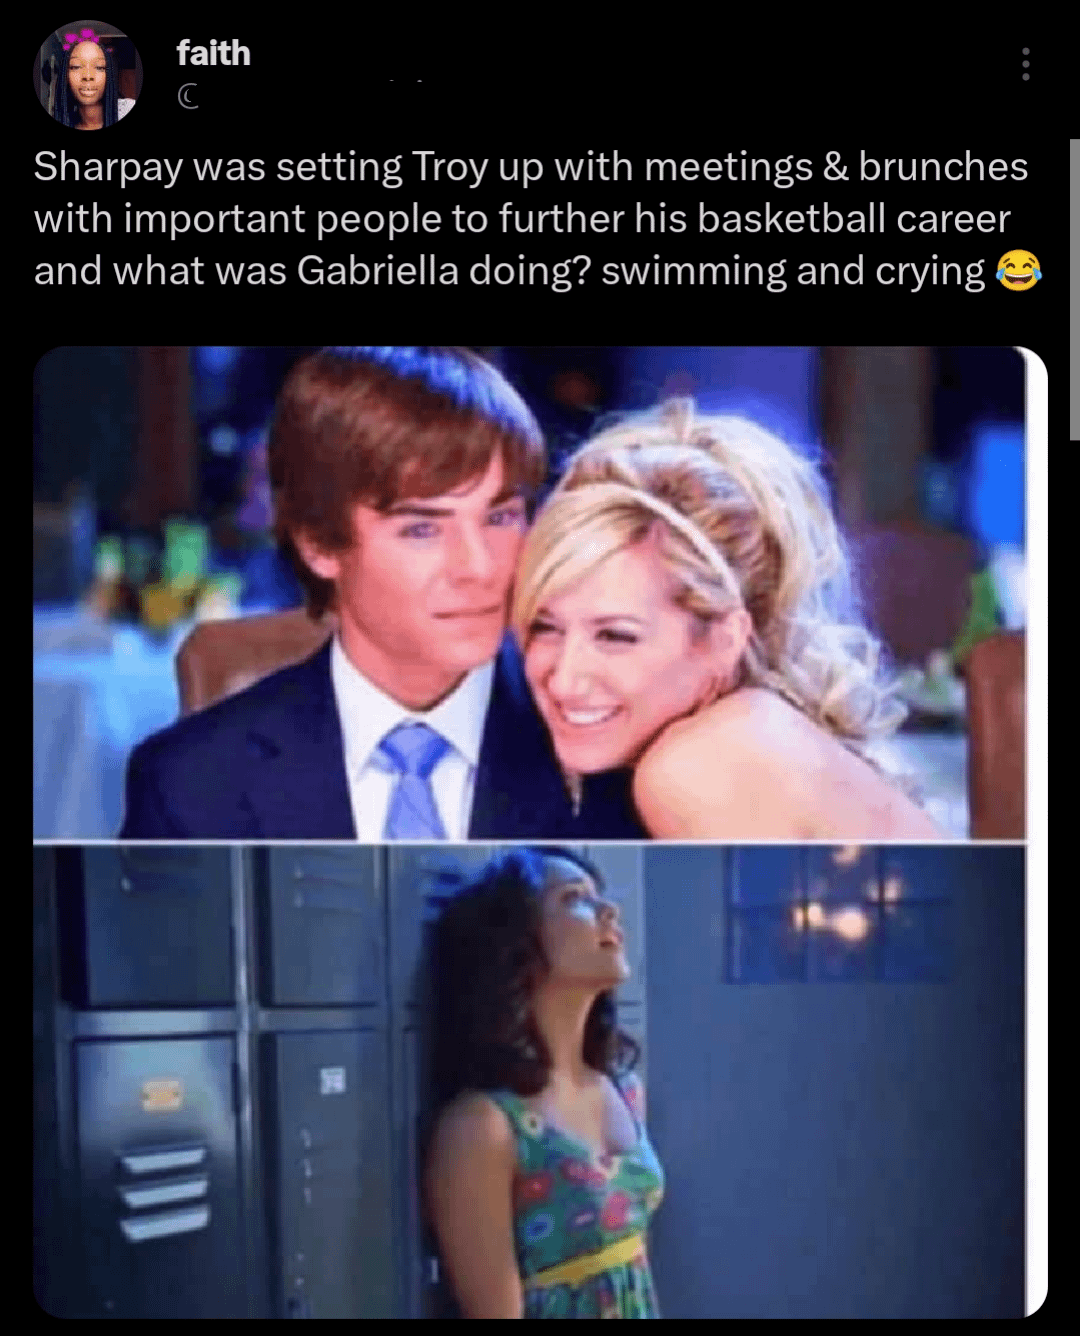 funny tweets - television program - faith Sharpay was setting Troy up with meetings & brunches with important people to further his basketball career and what was Gabriella doing? swimming and crying